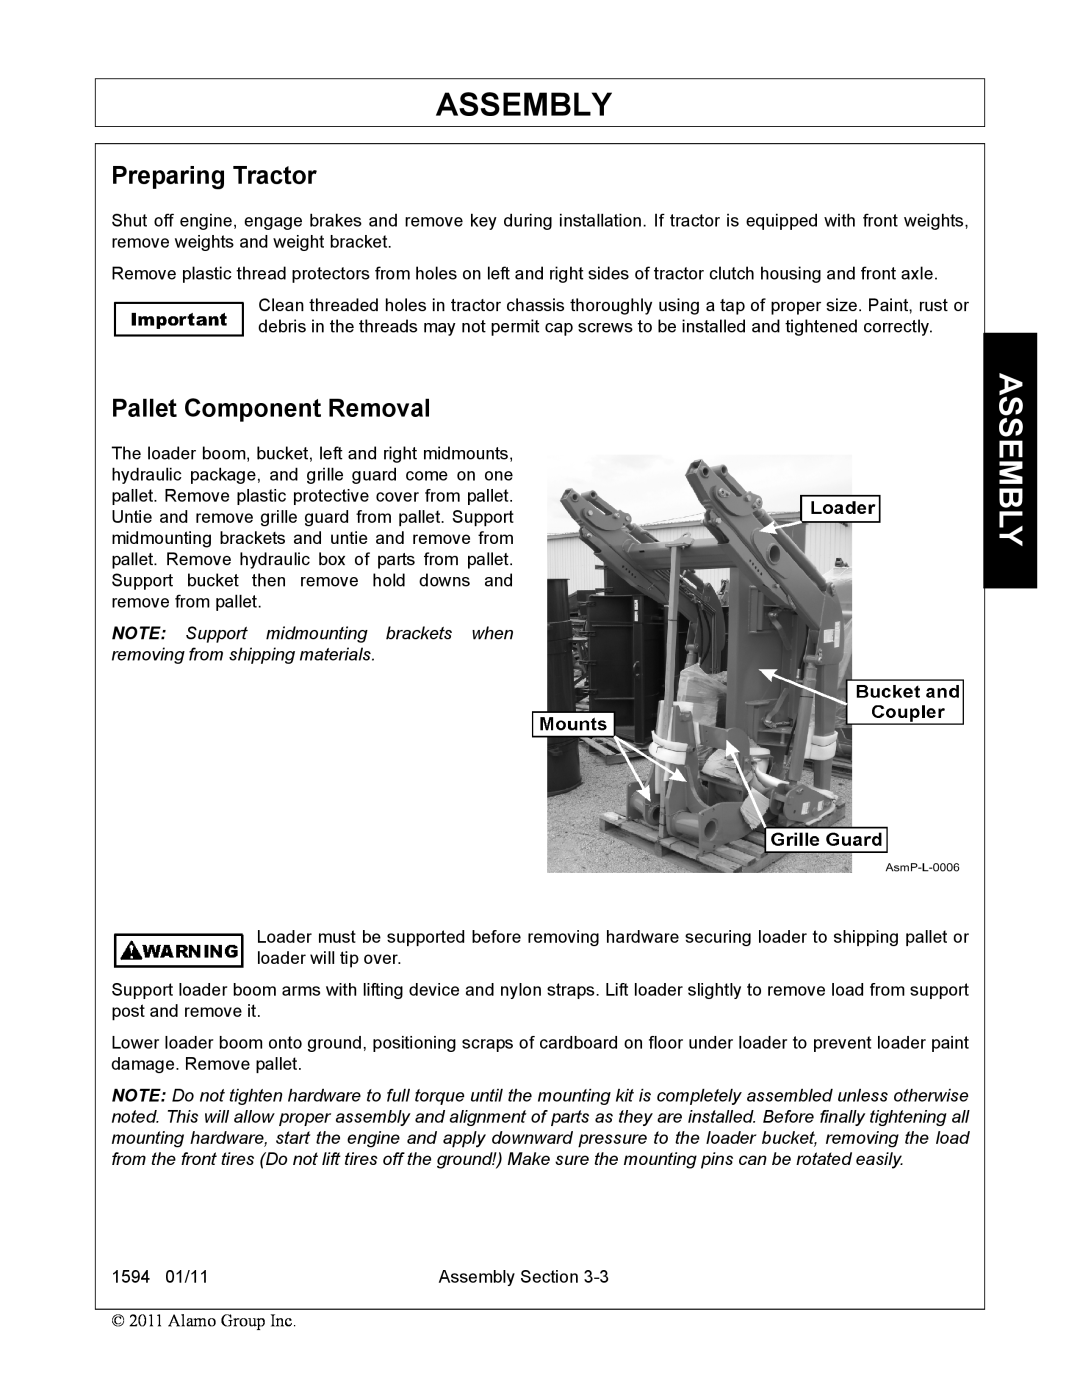 Rhino Mounts 1594 manual Assembly, Preparing Tractor, Pallet Component Removal 